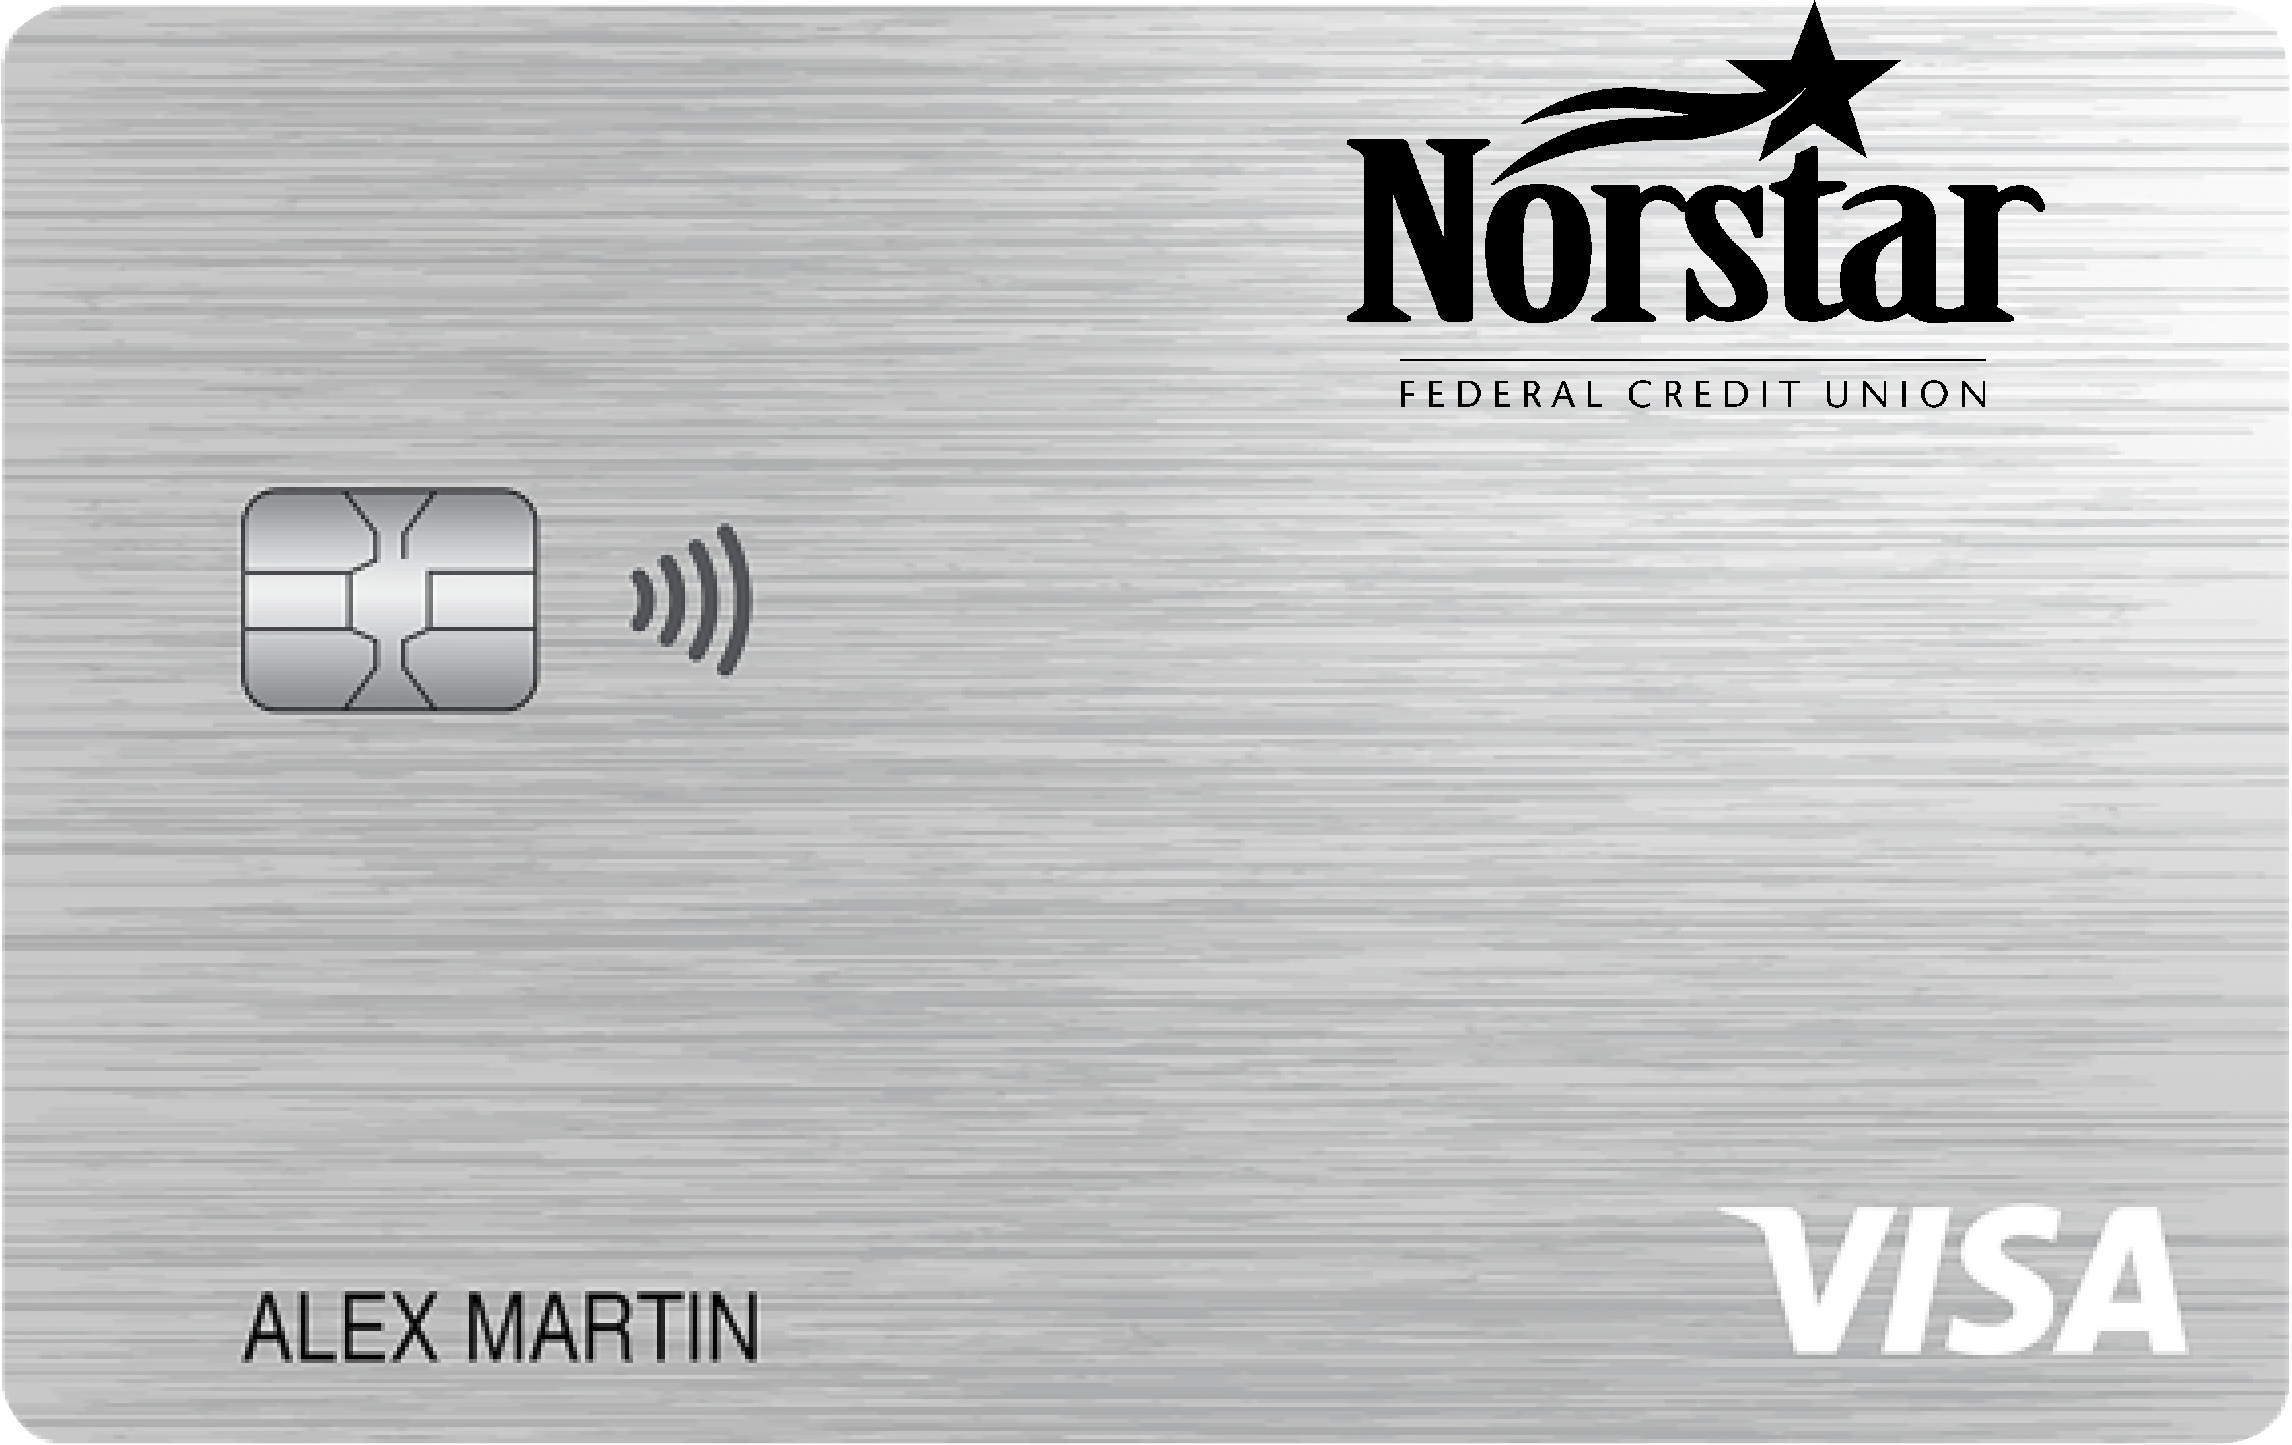 Norstar Federal Credit Union